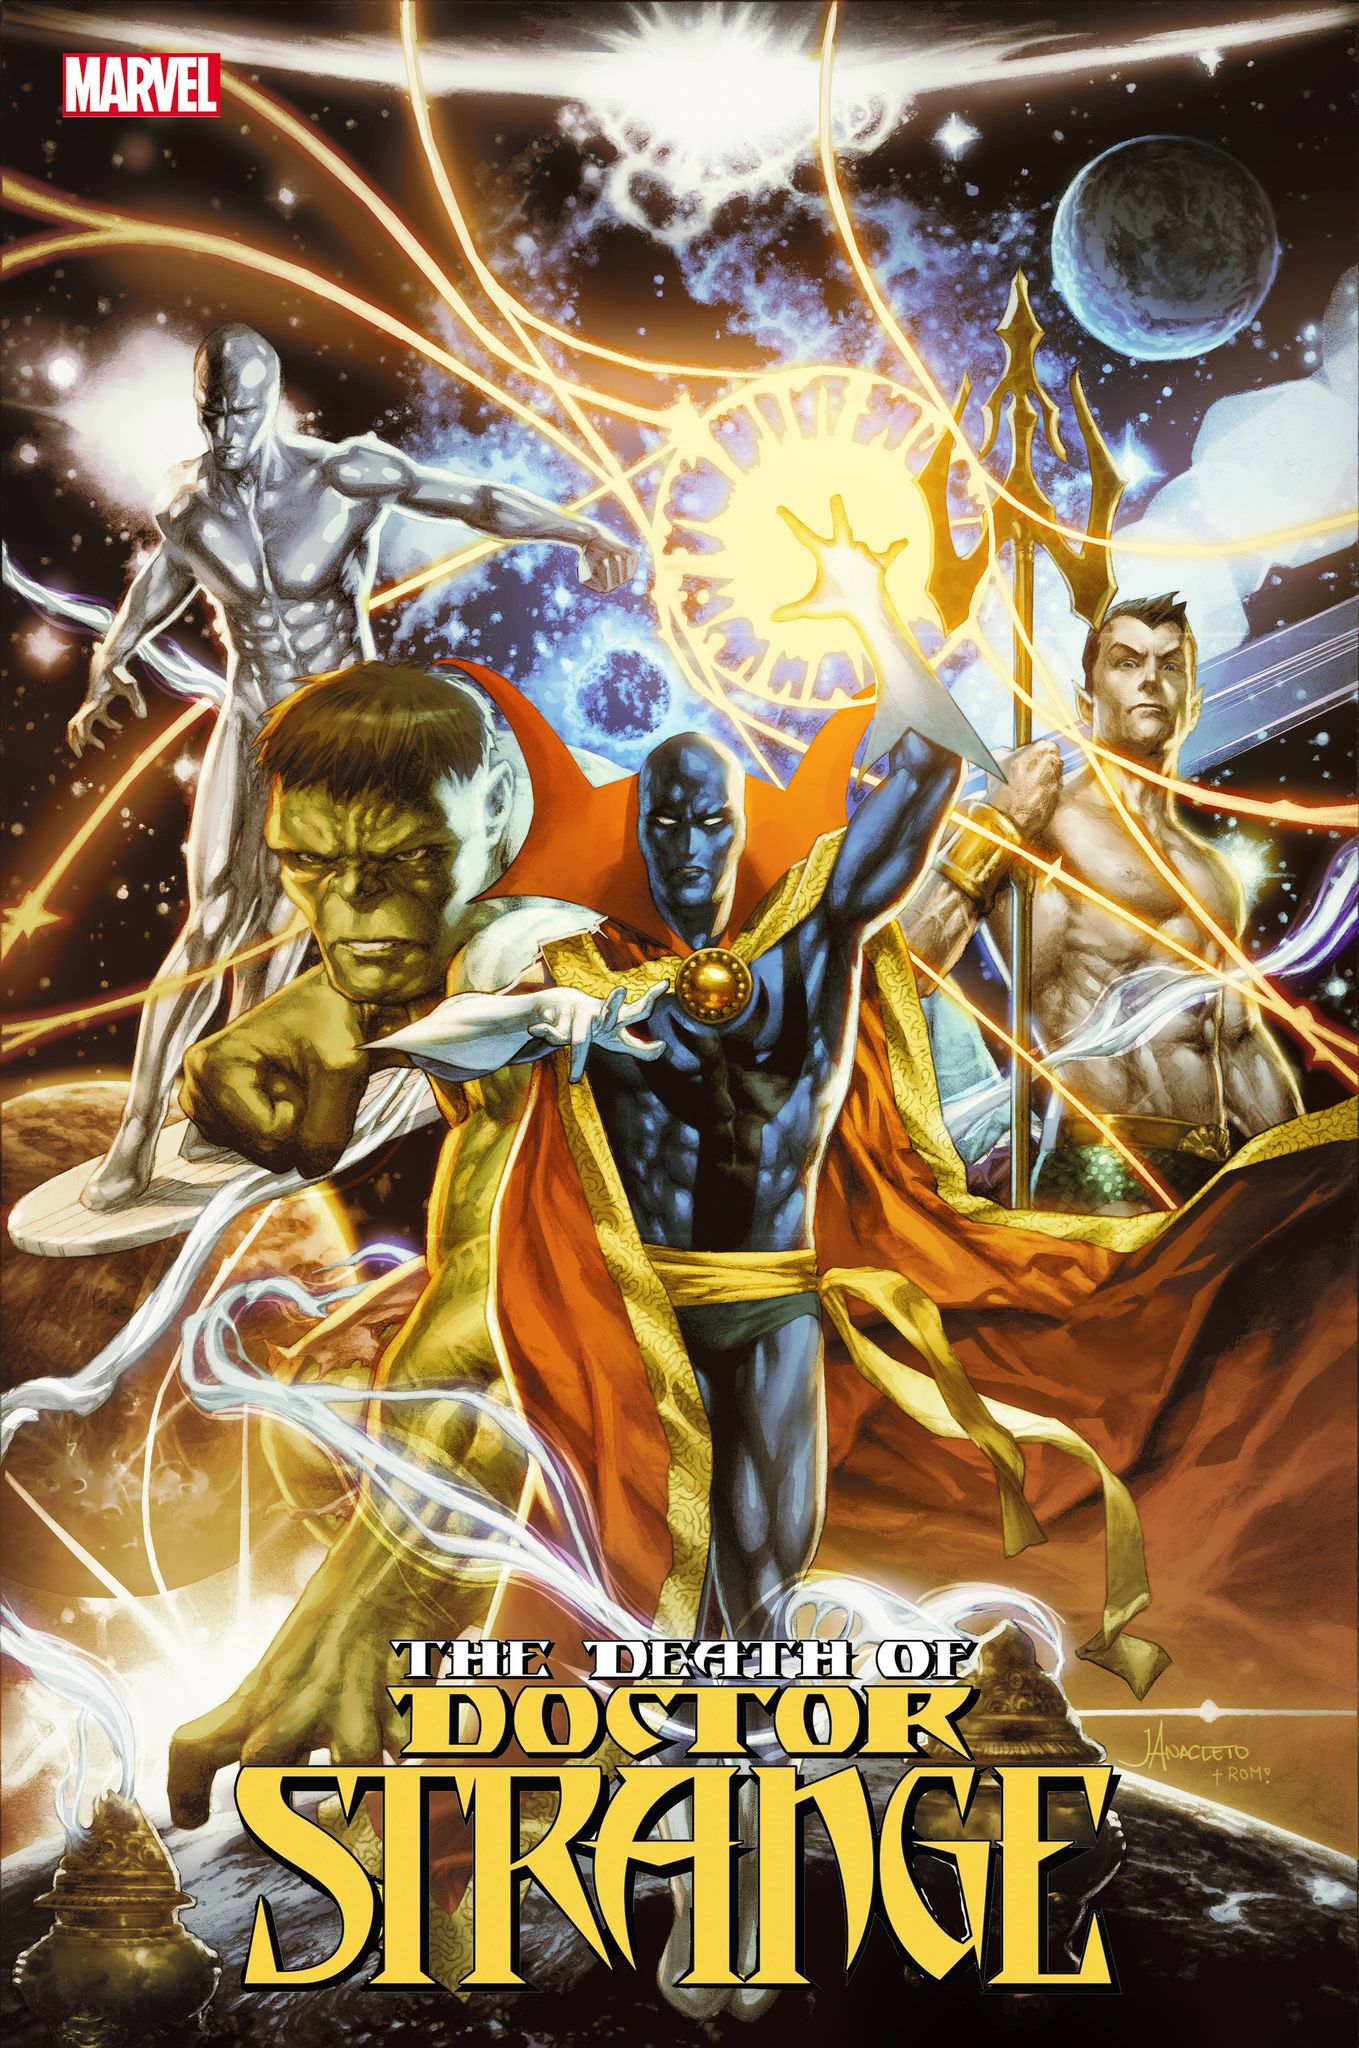 DEATH OF DOCTOR STRANGE #1 JAY ANACLETO EXCLUSIVE TRADE DRESS